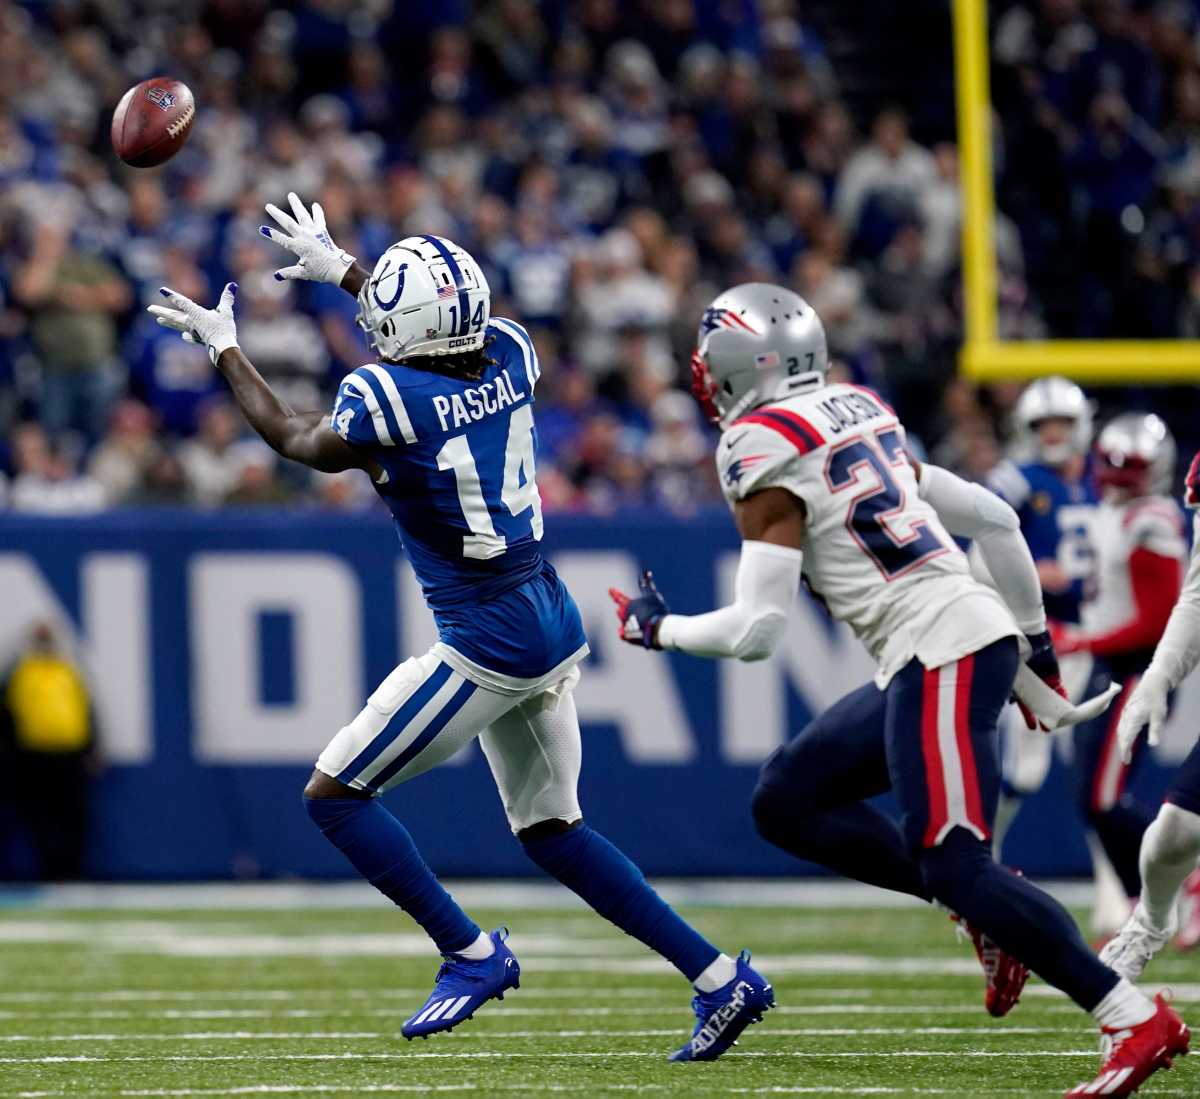 Indianapolis Colts wide receiver Zach Pascal (14) completes a catch ahead of New England Patriots cornerback J.C. Jackson (27) on Saturday, Dec. 18, 2021, during a game against the New England Patriots at Lucas Oil Stadium in Indianapolis.